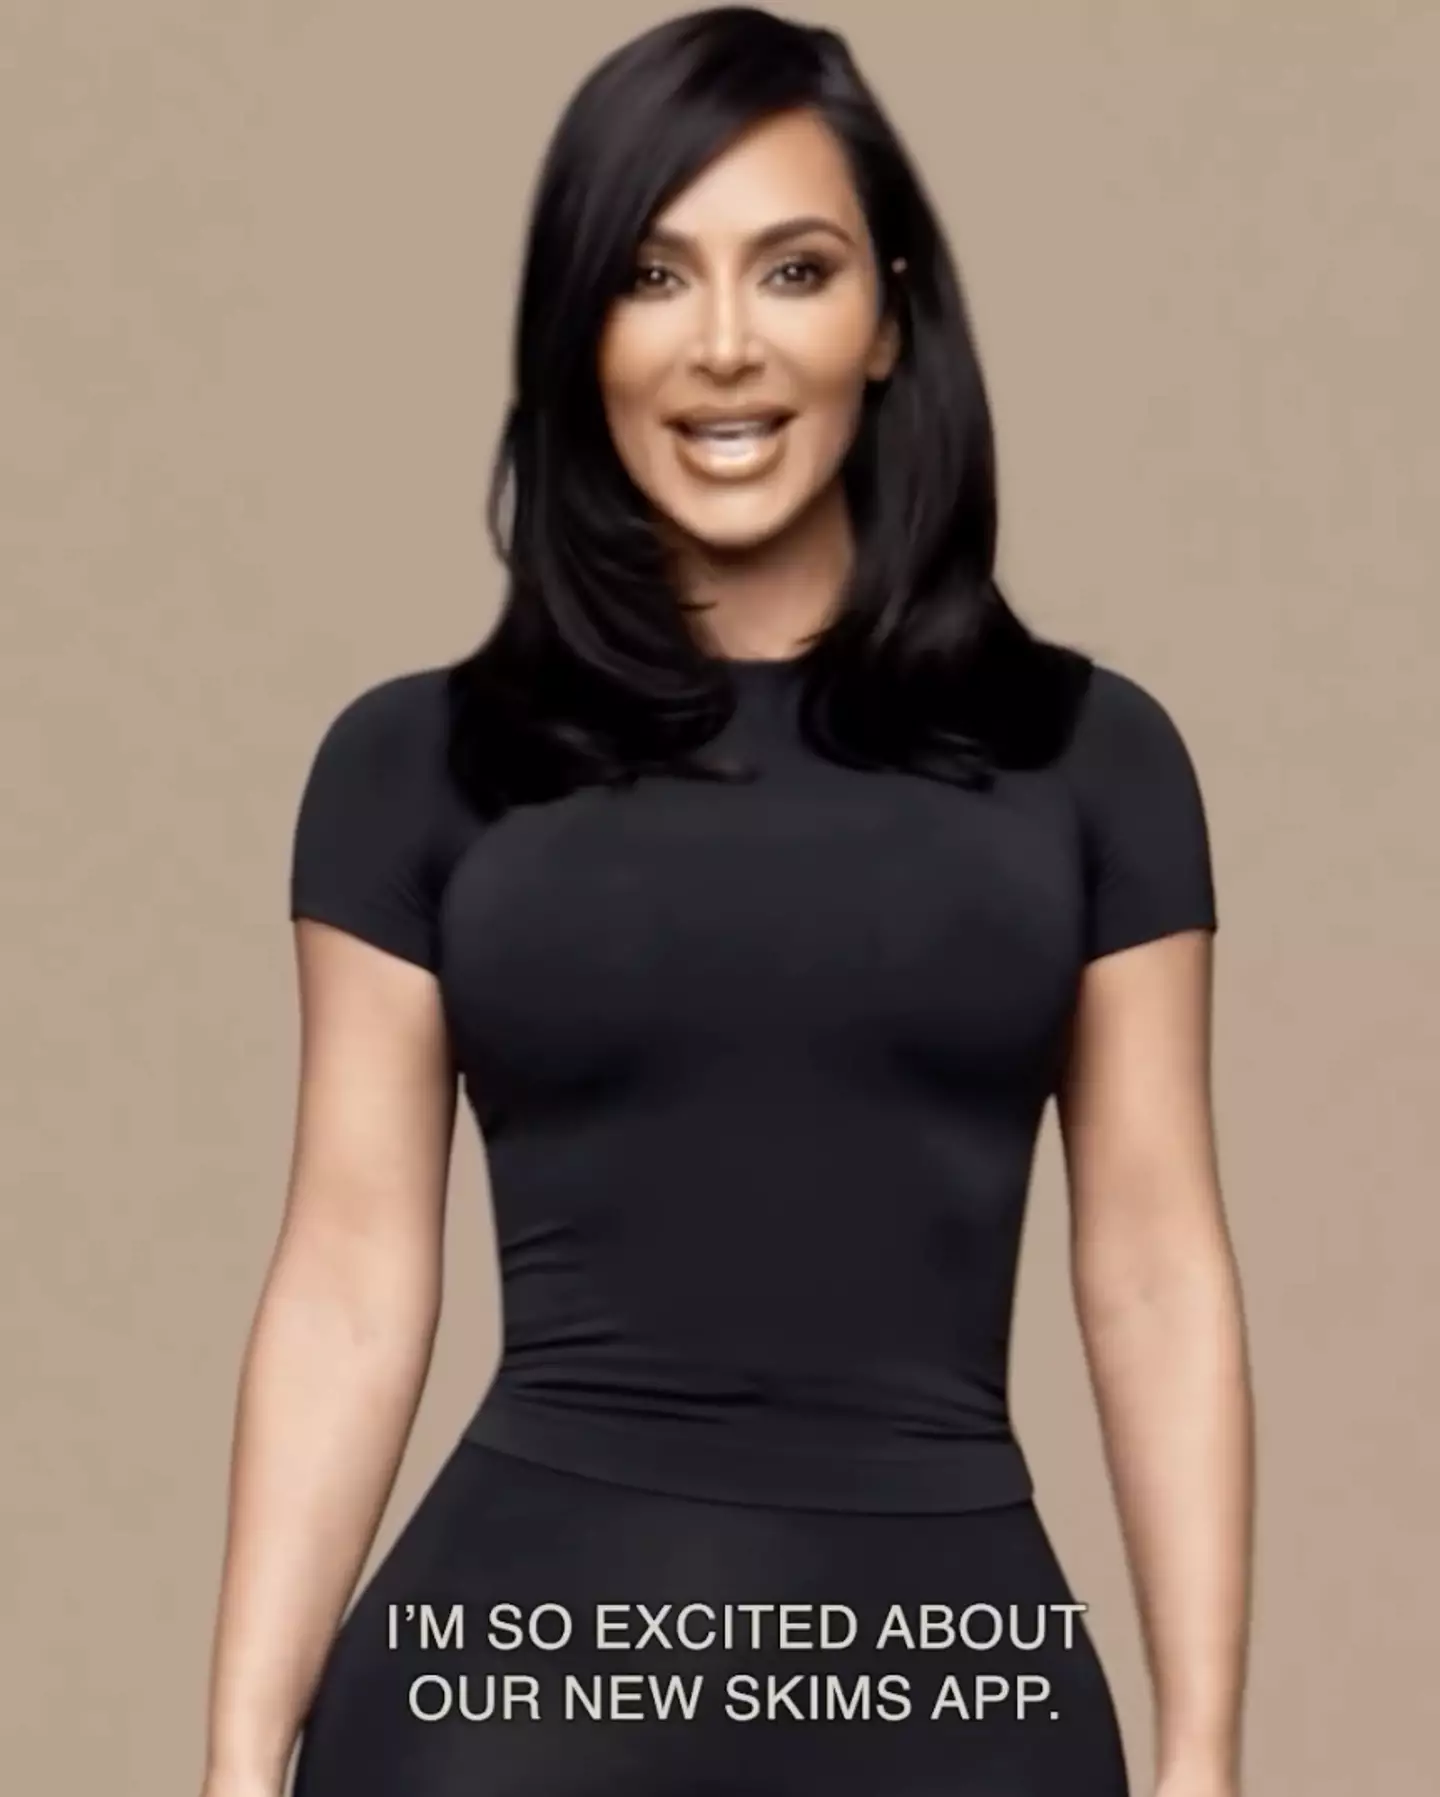 Viewers called attention to Kim's voice in the ad. (Instagram/@kimkardashian)